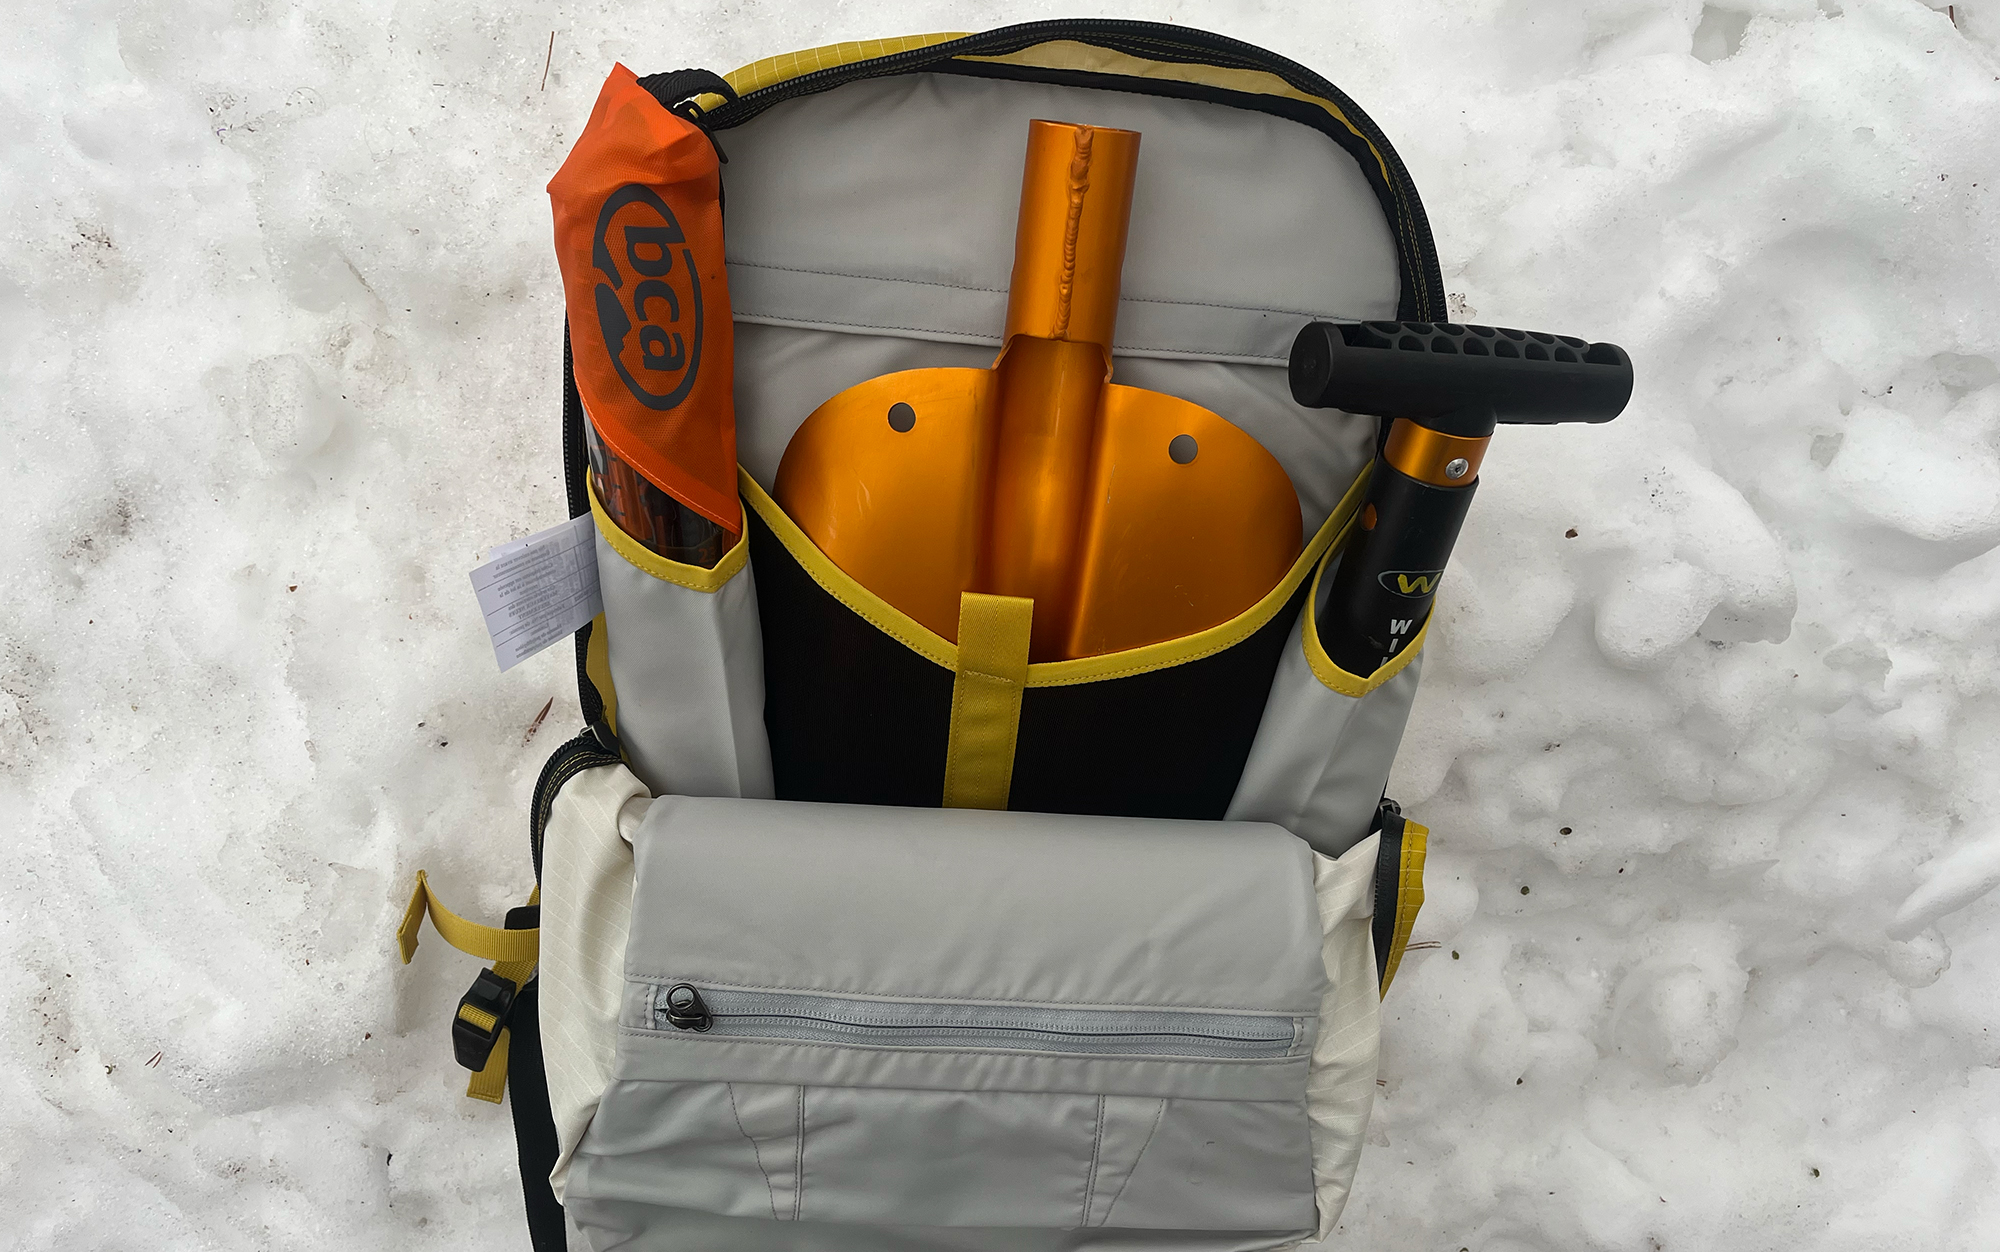 The Arc’teryx Rush SK 16 is one of the best winter backpacks because it has designated pockets for avalanche safety tools.